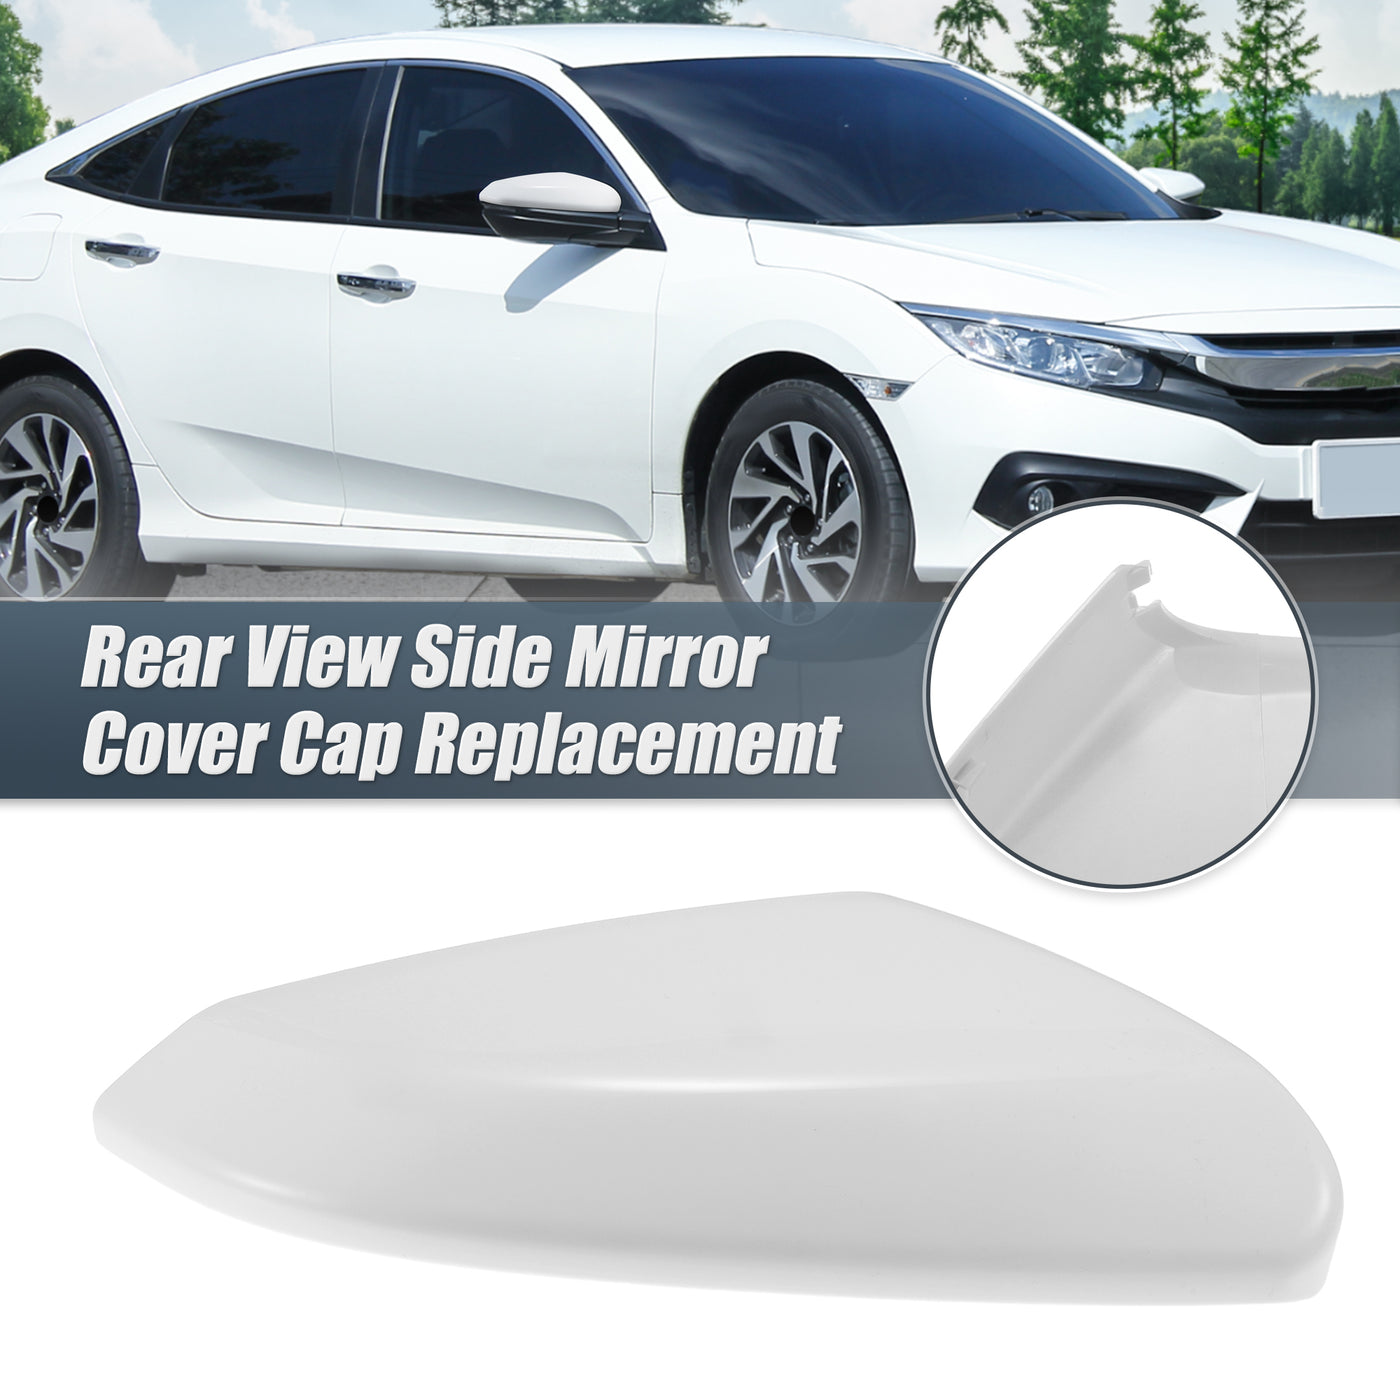 X AUTOHAUX Car Rear View Right Passenger Side Mirror Cover Cap Replacement White for Honda CIVIC 2016-2021 Mirror Guard Covers Exterior Decoration Trims